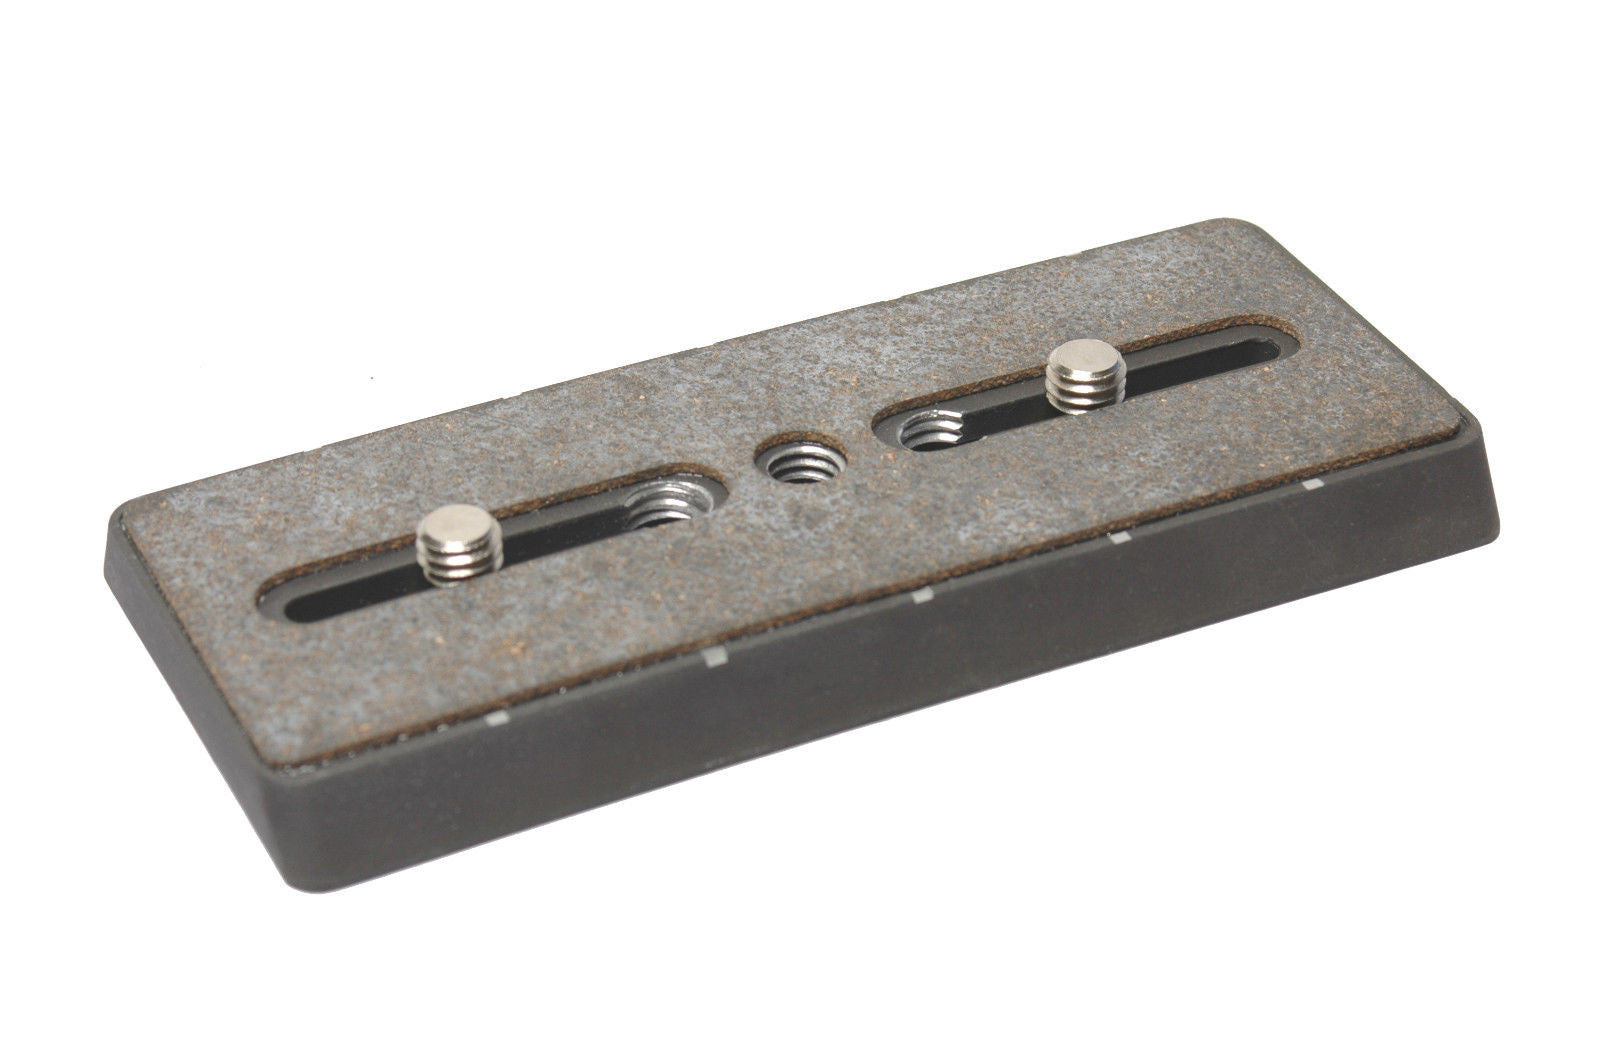 Gitzo Long Quick Release Plate for G1372 & G1376 M-Series Heads (1374-38)